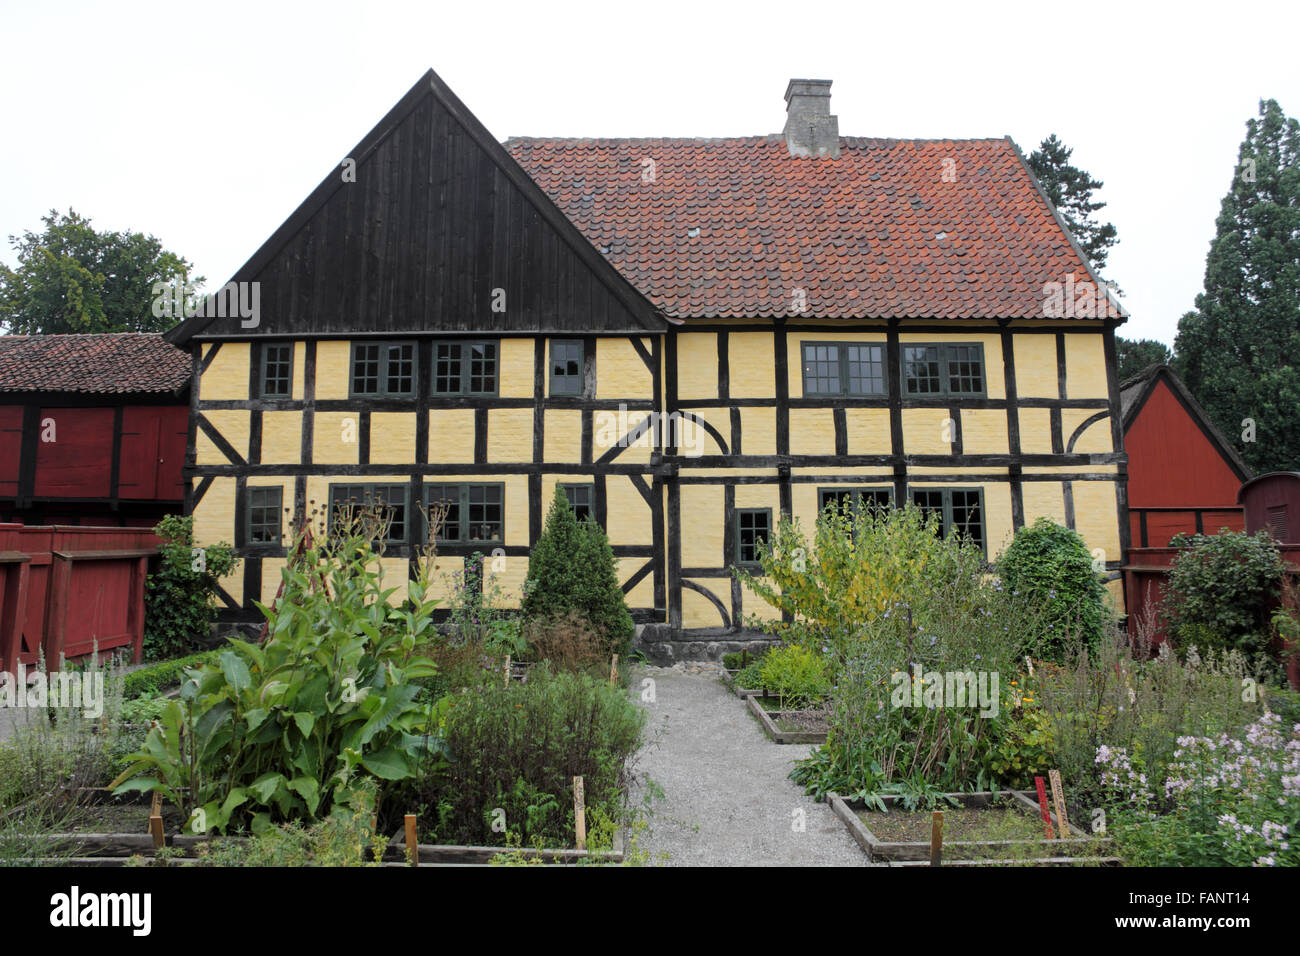 Den Gamle By - The Old Town in Aarhus, Denmark, is an open-air town museum. Stock Photo